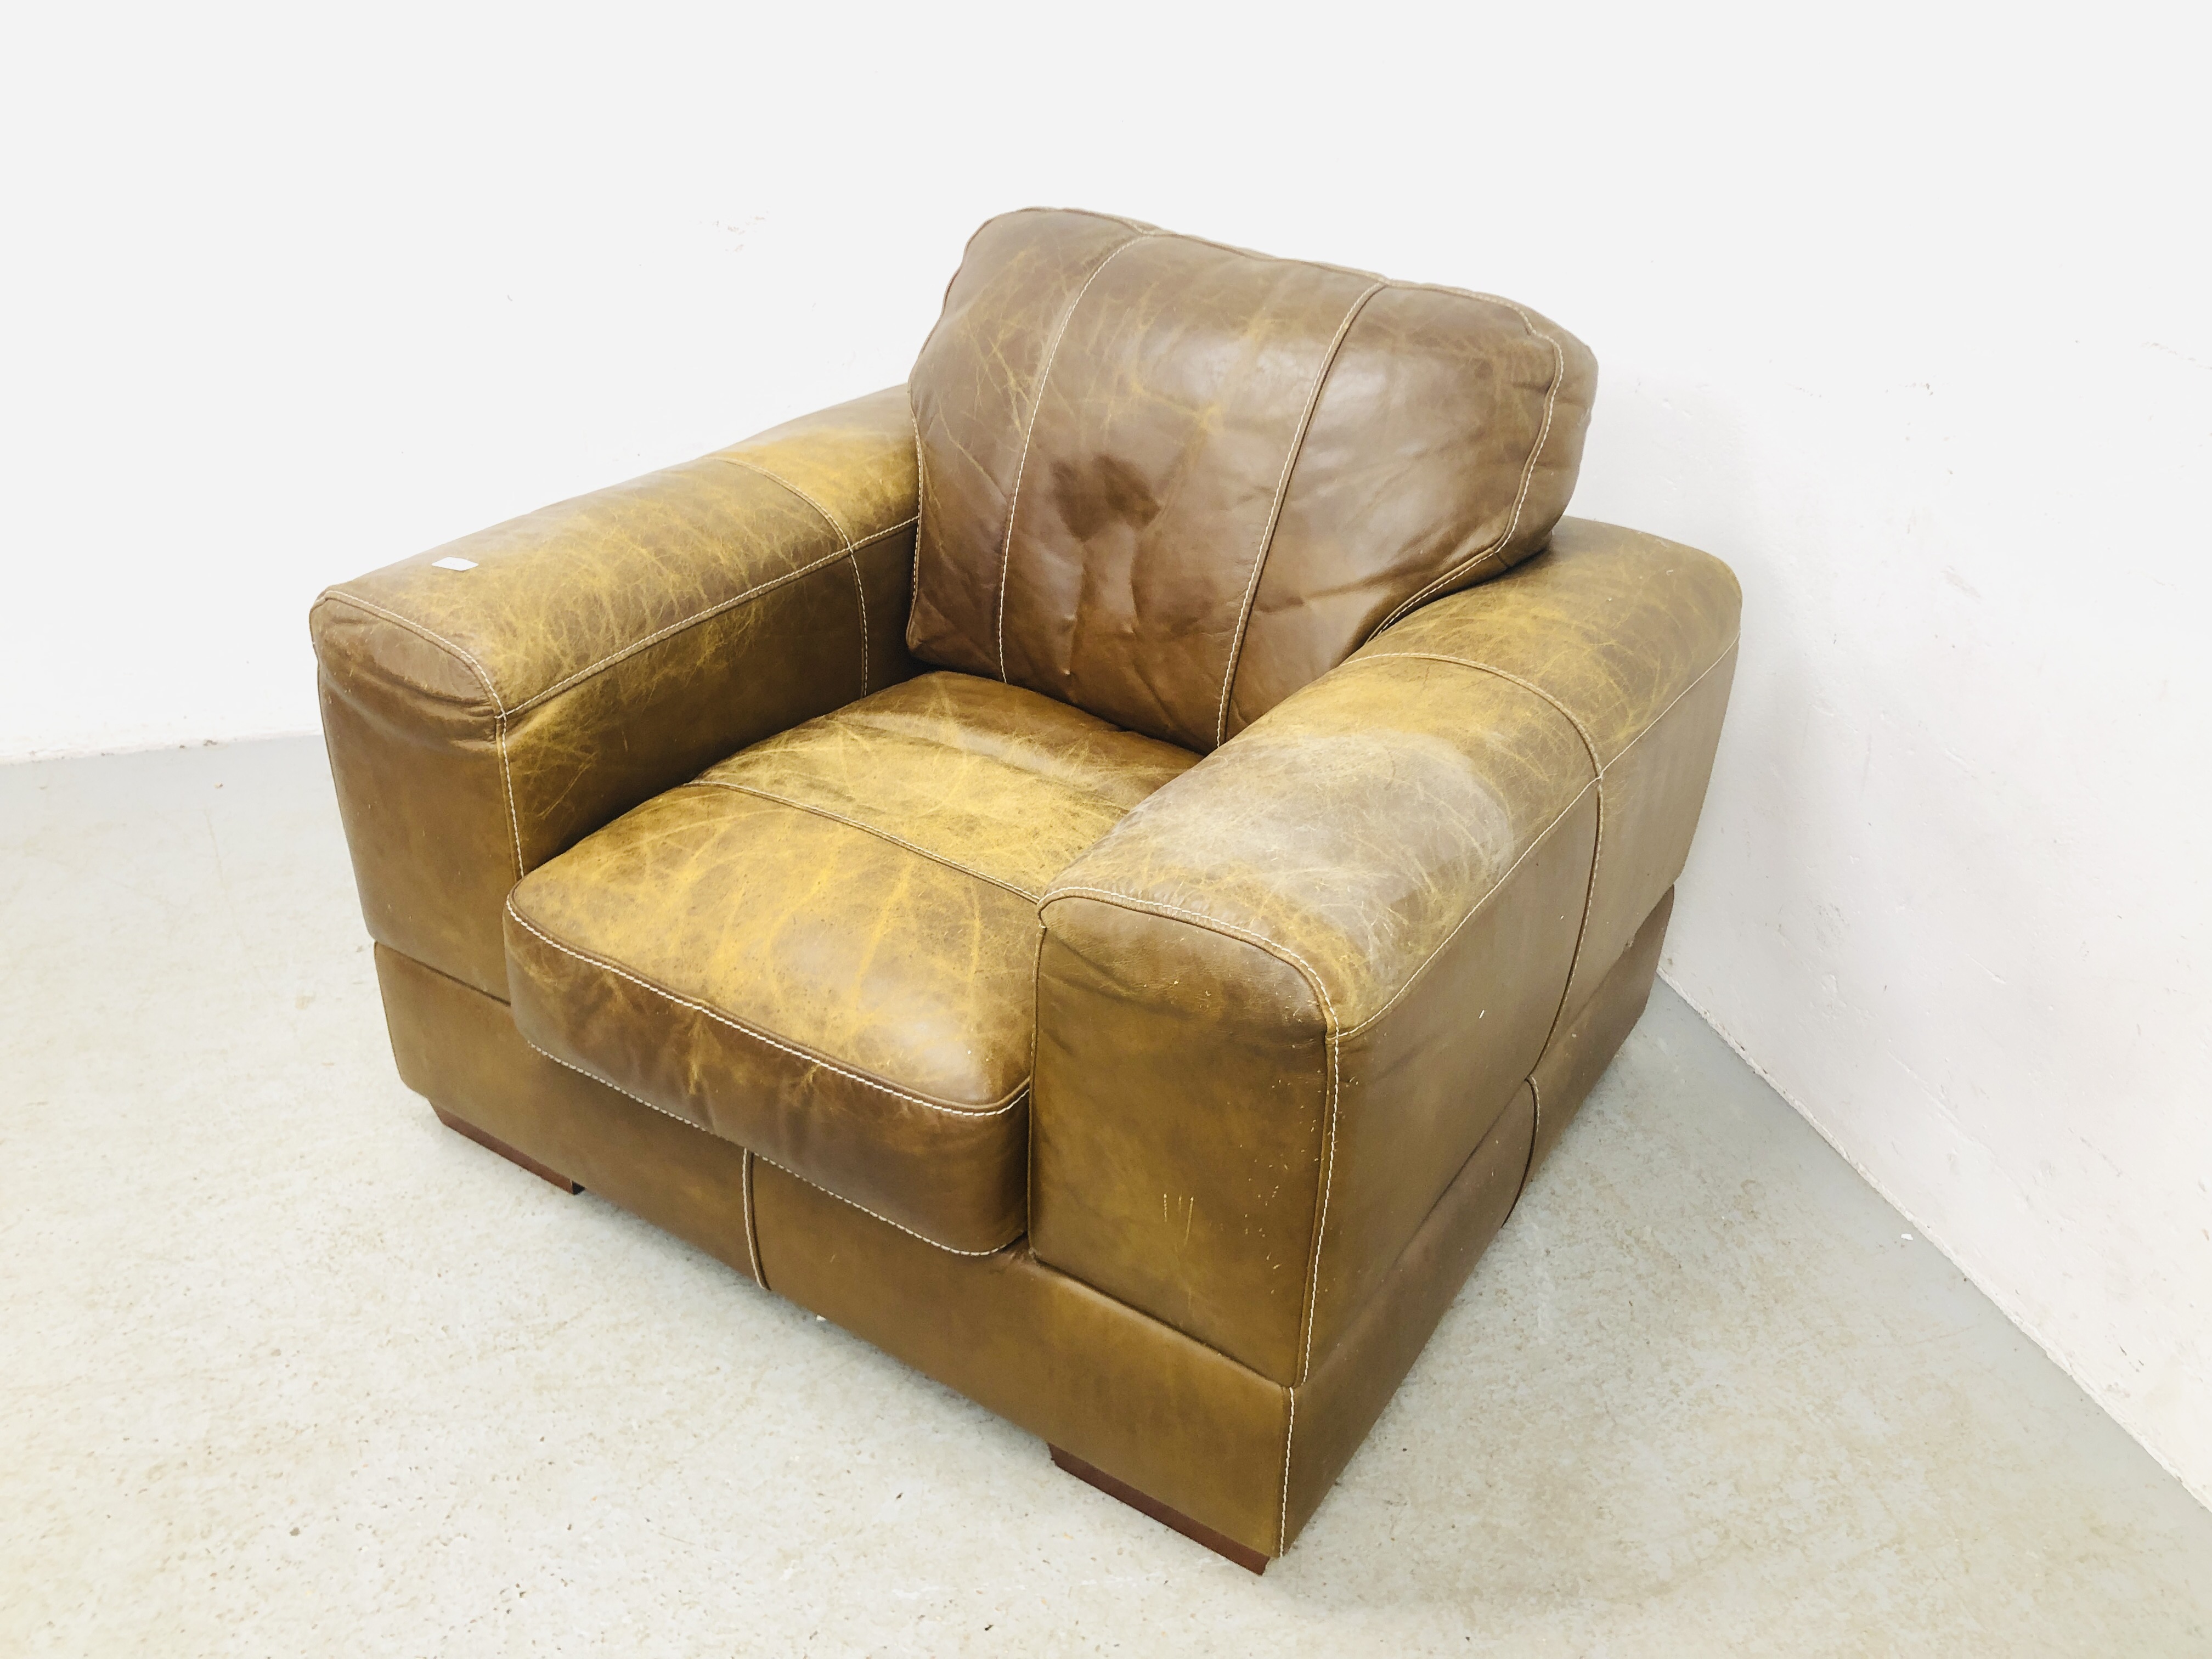 MODERN BROWN LEATHER ARMCHAIR - Image 2 of 5